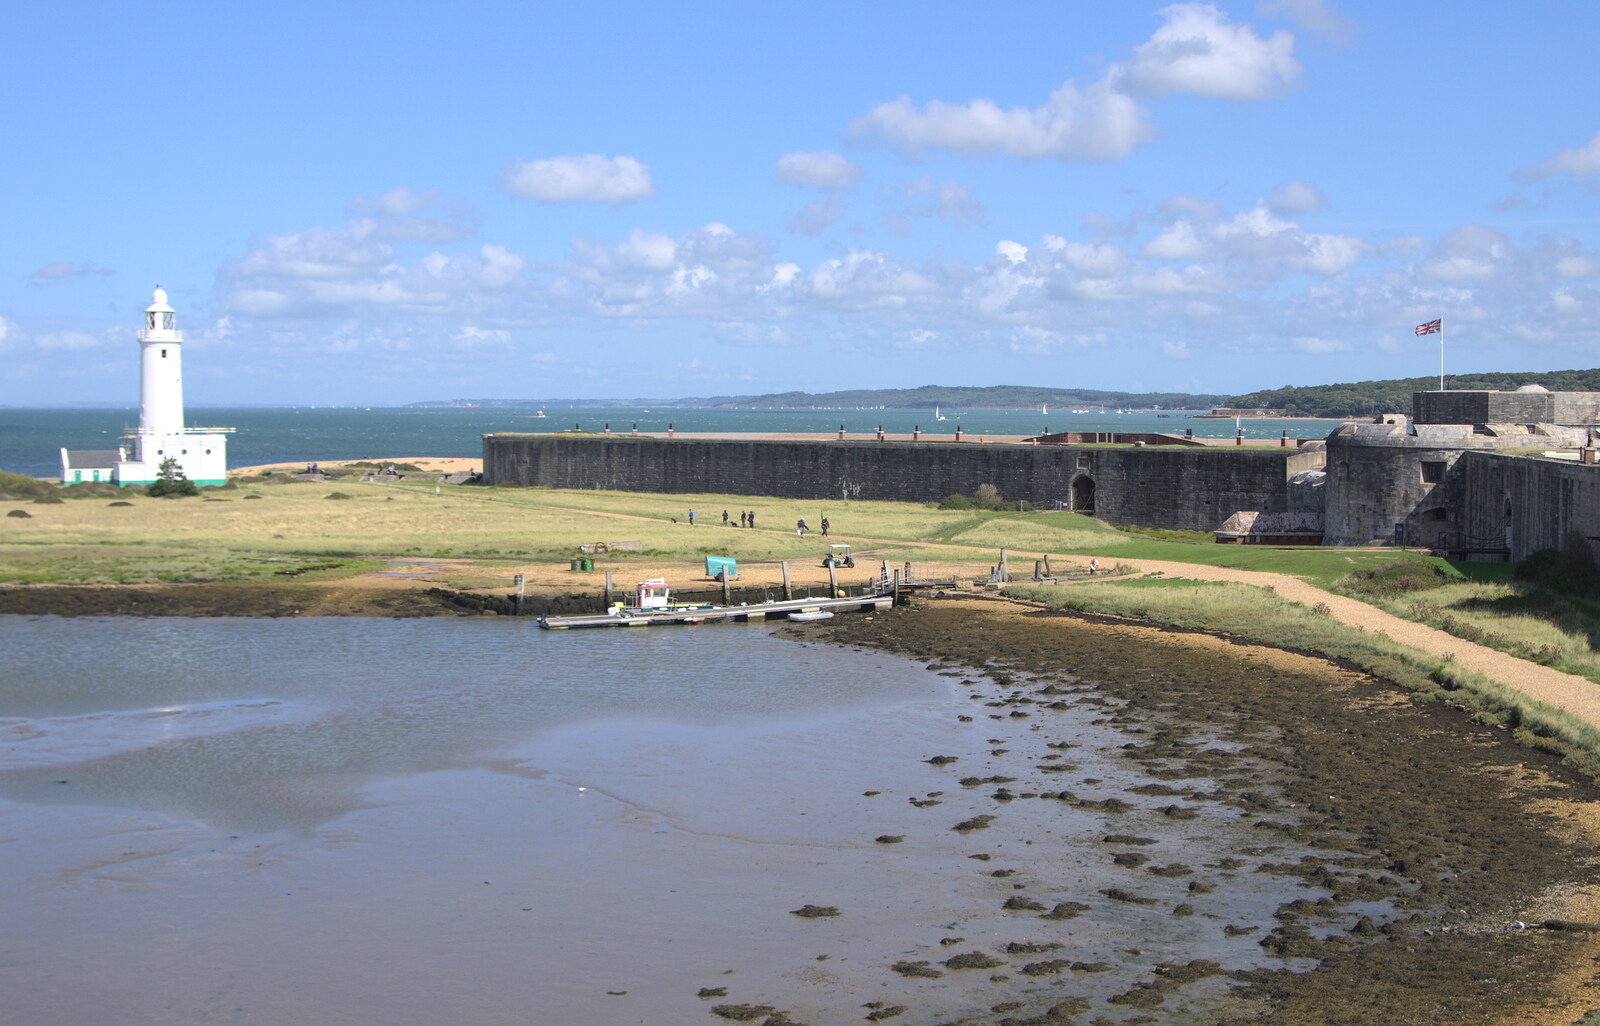 Looking towards the Isle of Wight from A Trip to Hurst Castle, Keyhaven, Hampshire - 28th August 2015